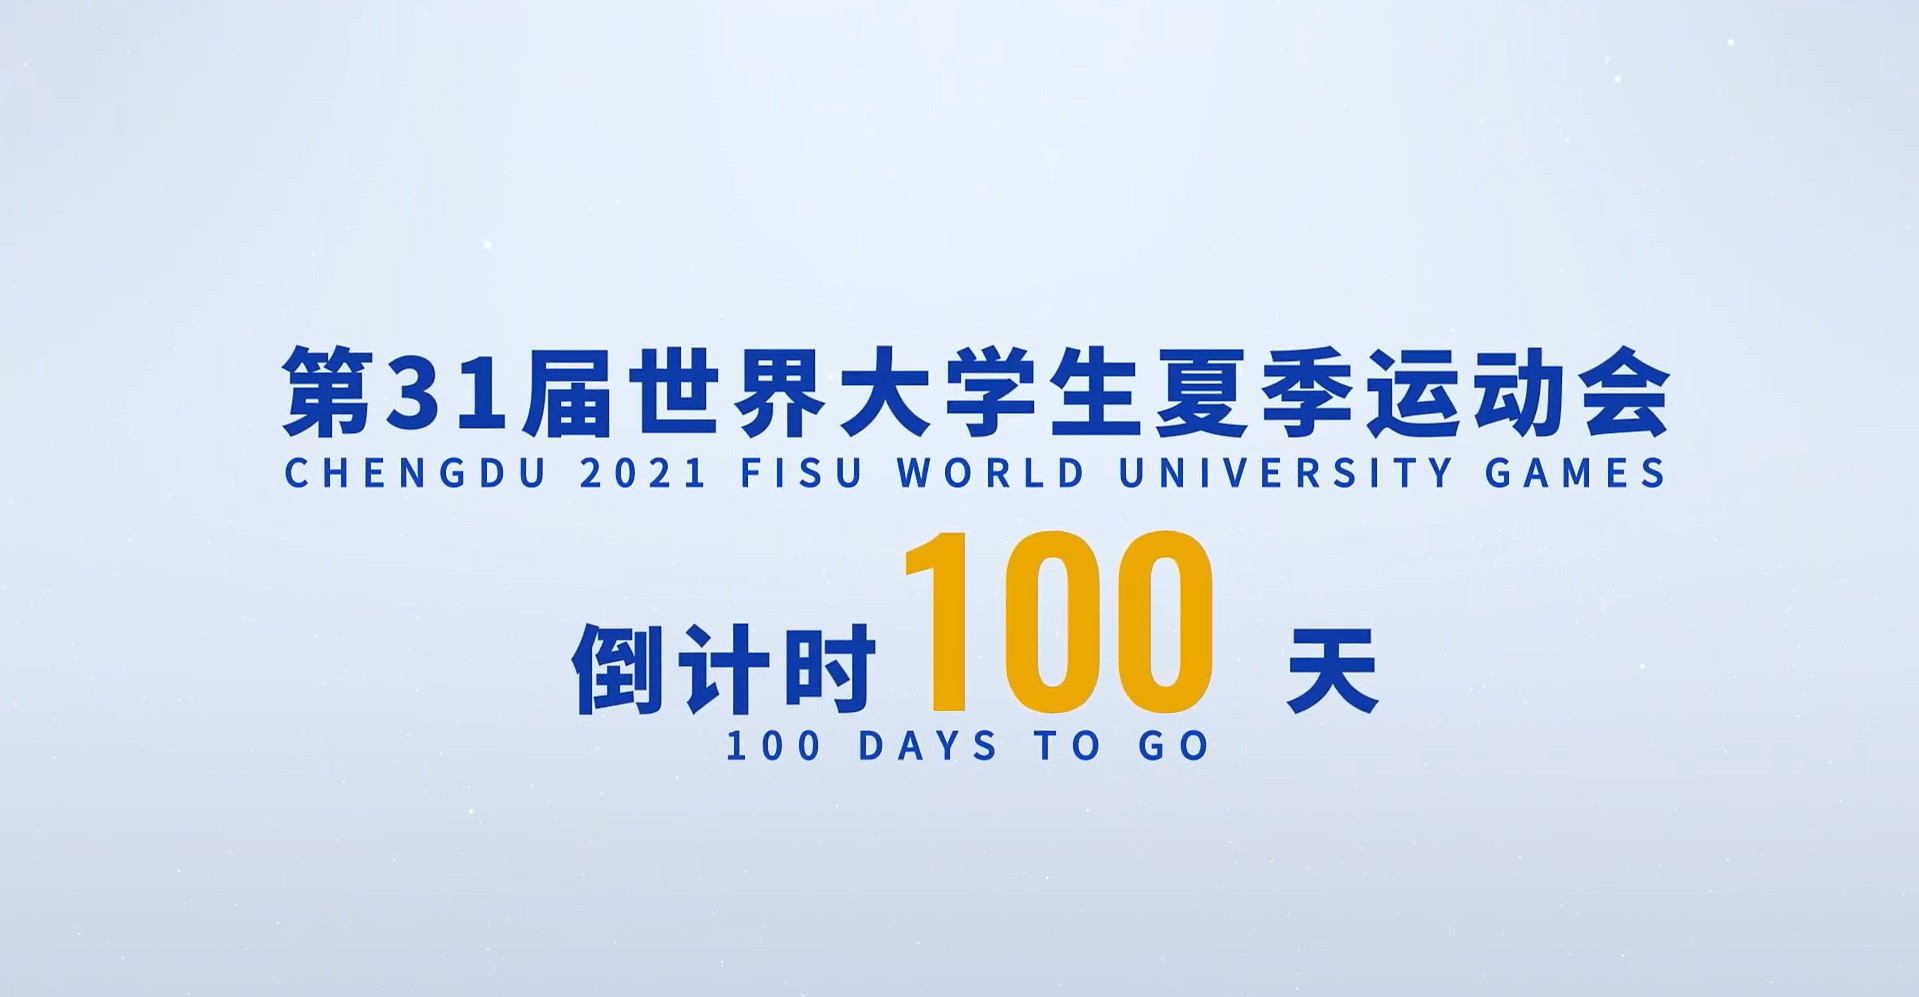 FISU President stresses Chengdu’s readiness for Summer World University Games with 100 days to go